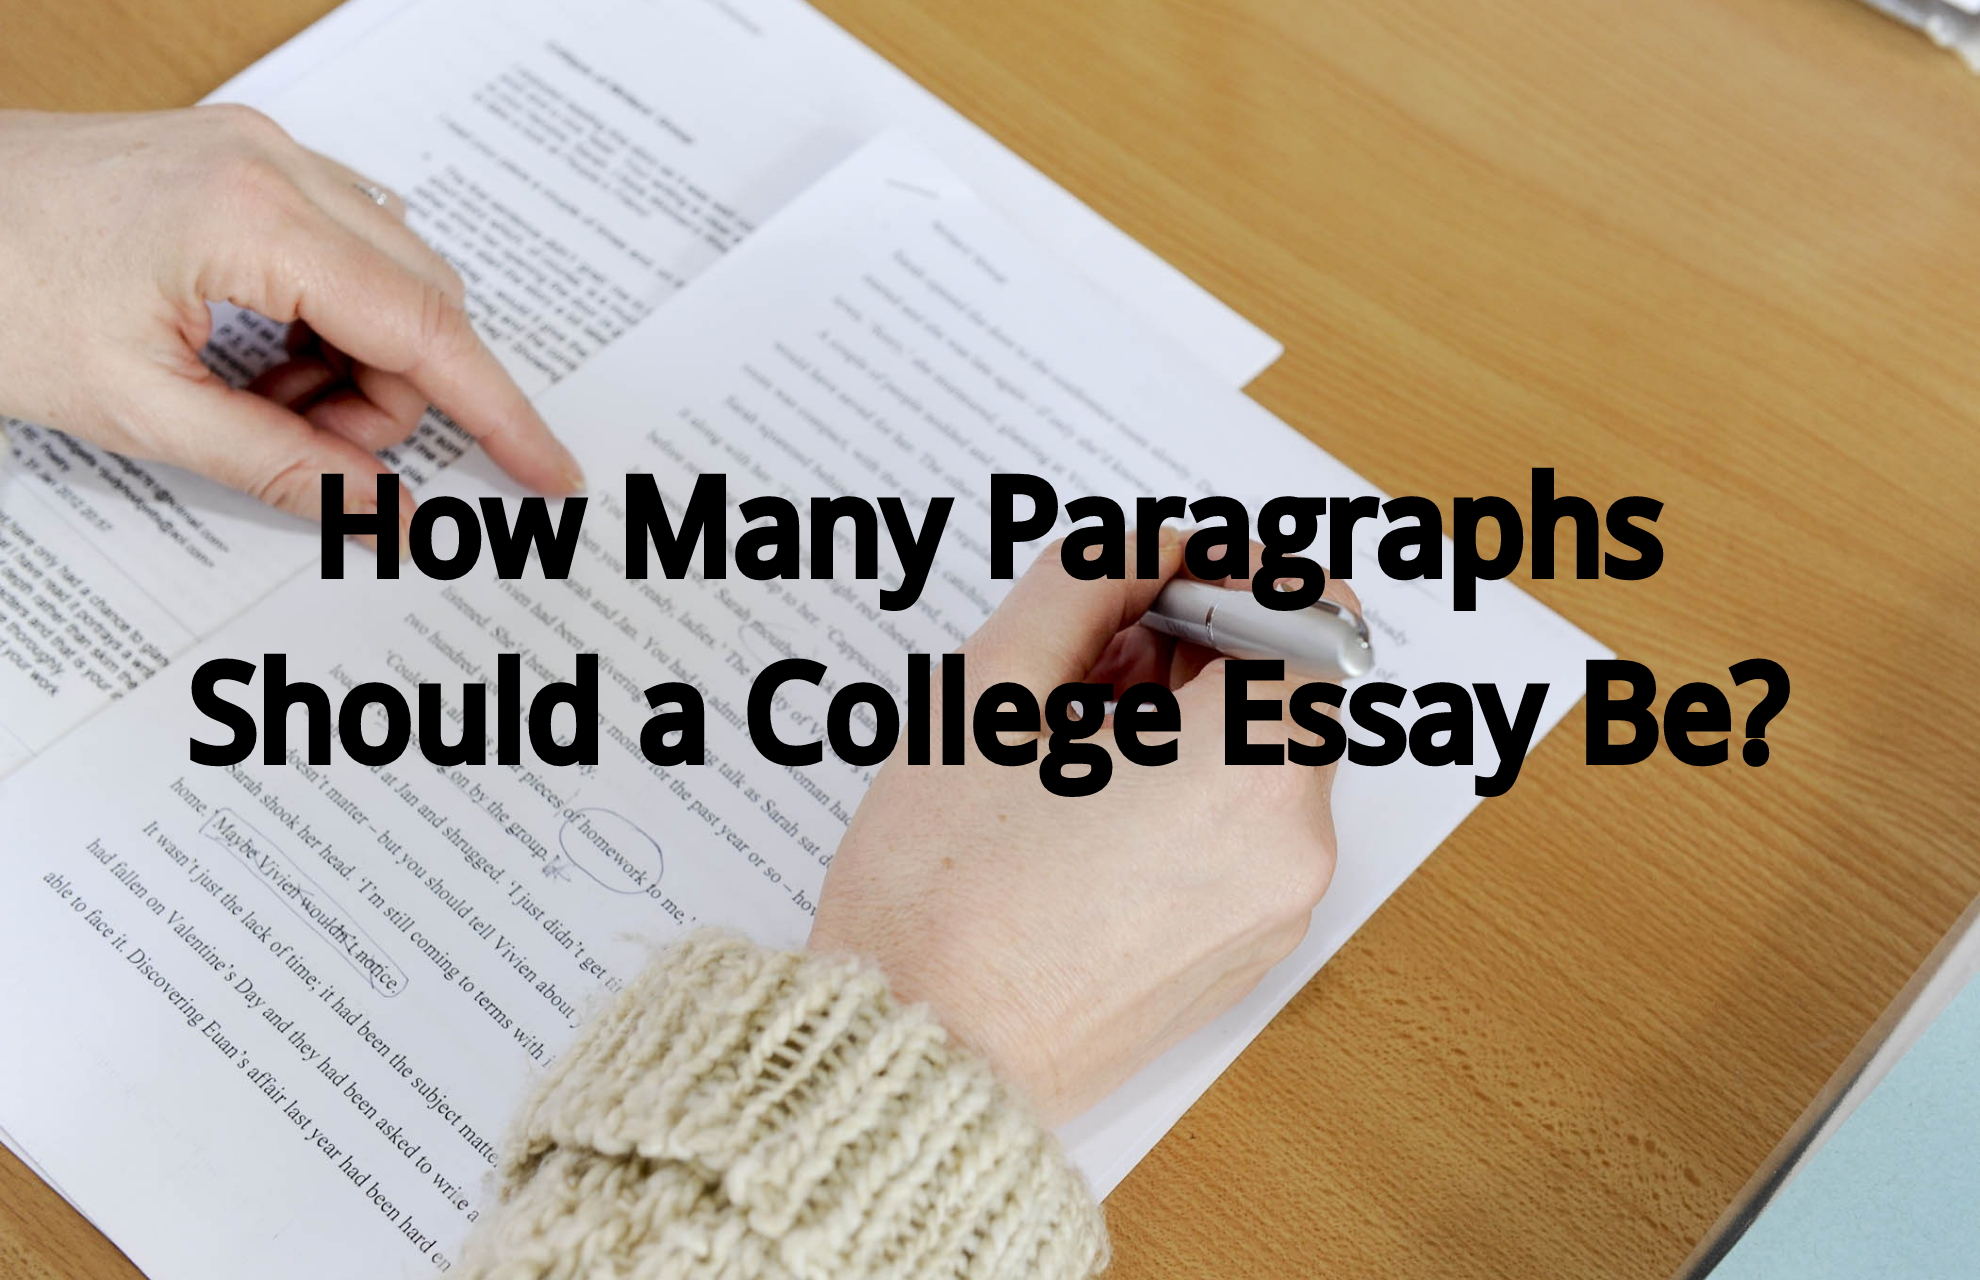 How Many Paragraphs Should a College Essay Be?